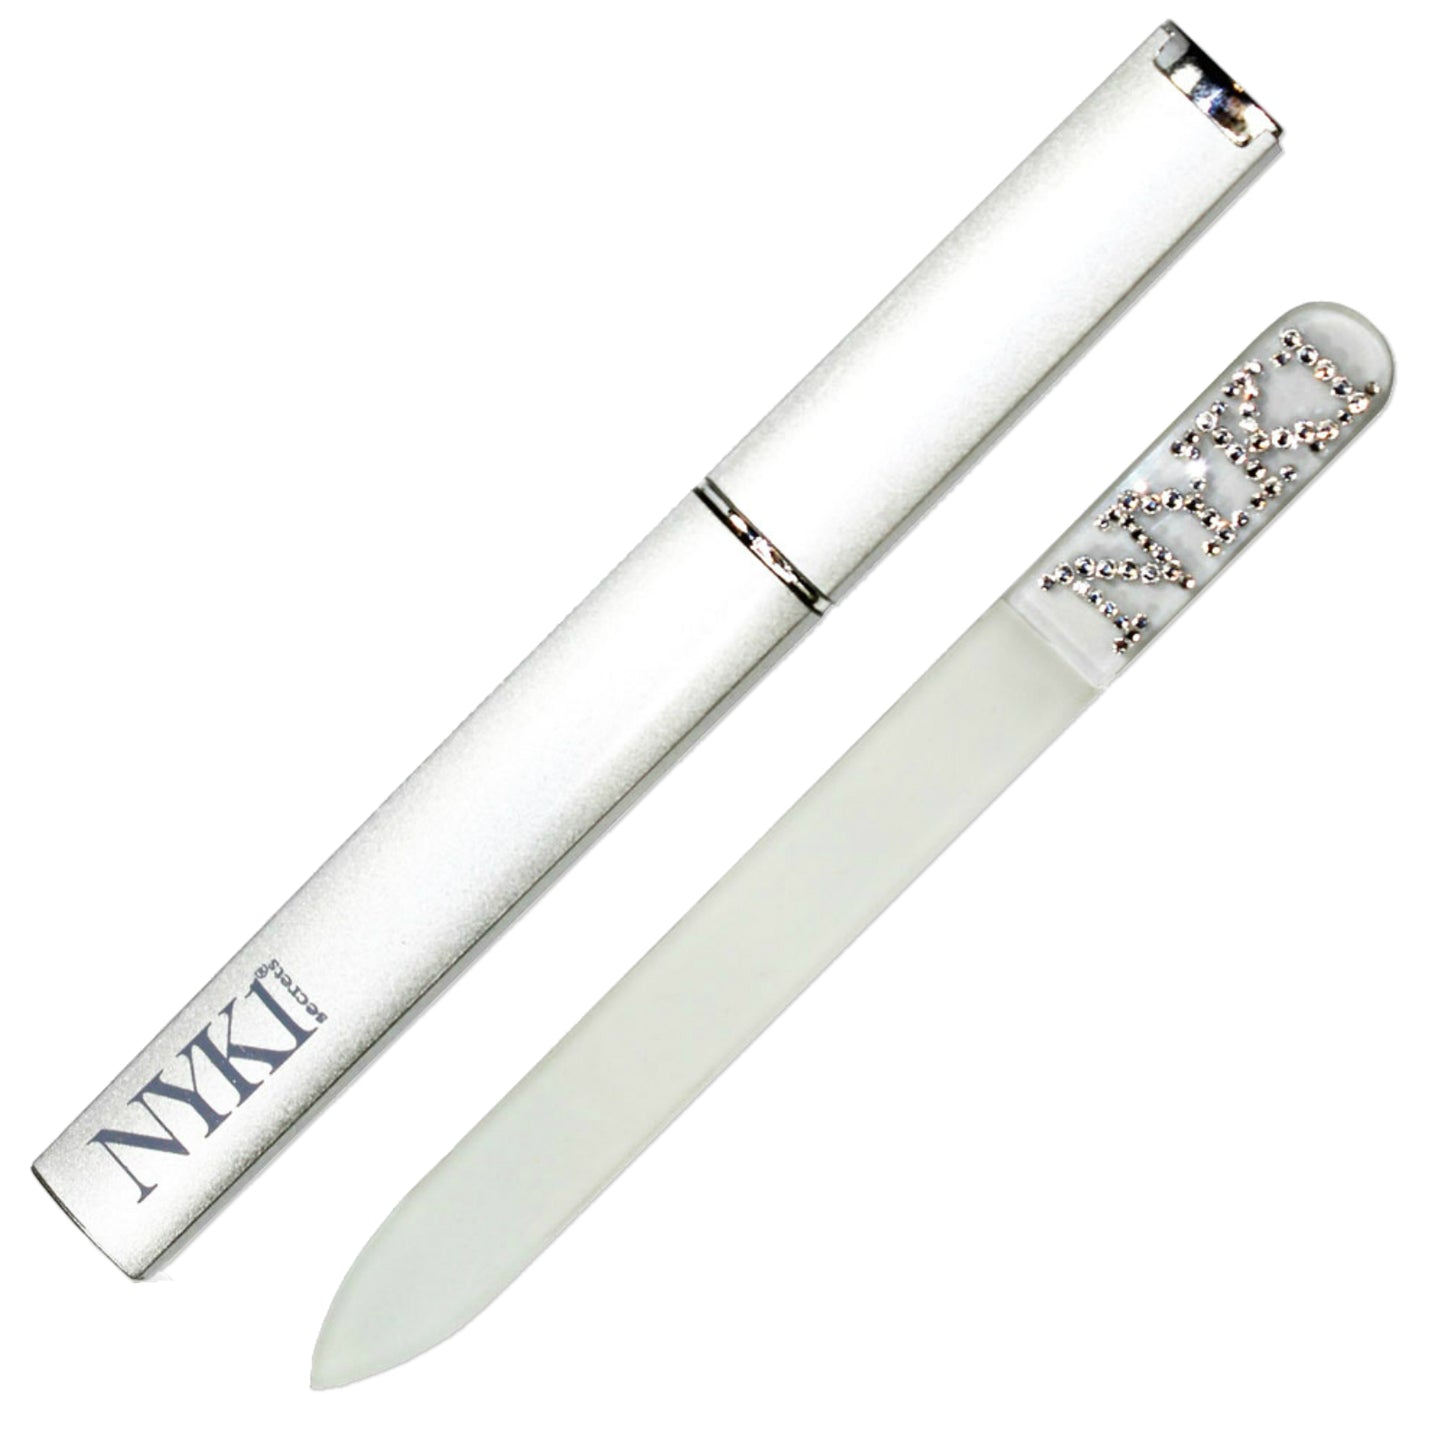 NYK1 Best Swarovski Crystal Glass Nail File with Carry Case - Excellent Gift 